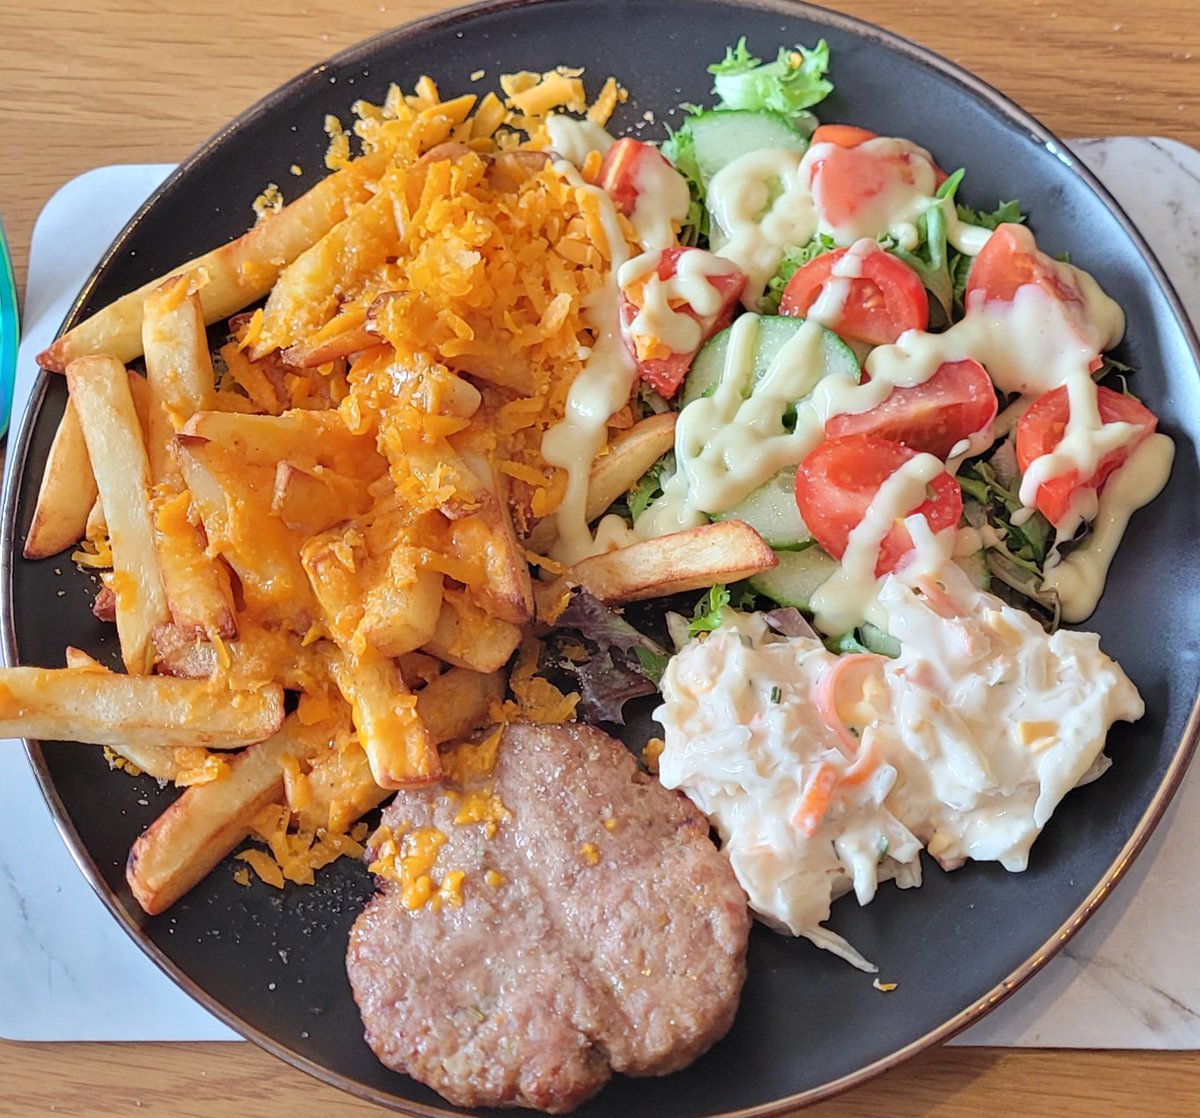 Pork & apricot burger, salad with salad cream (❤️).. Cheese coleslaw and cheesy chips! 😋 #naughtybutnice